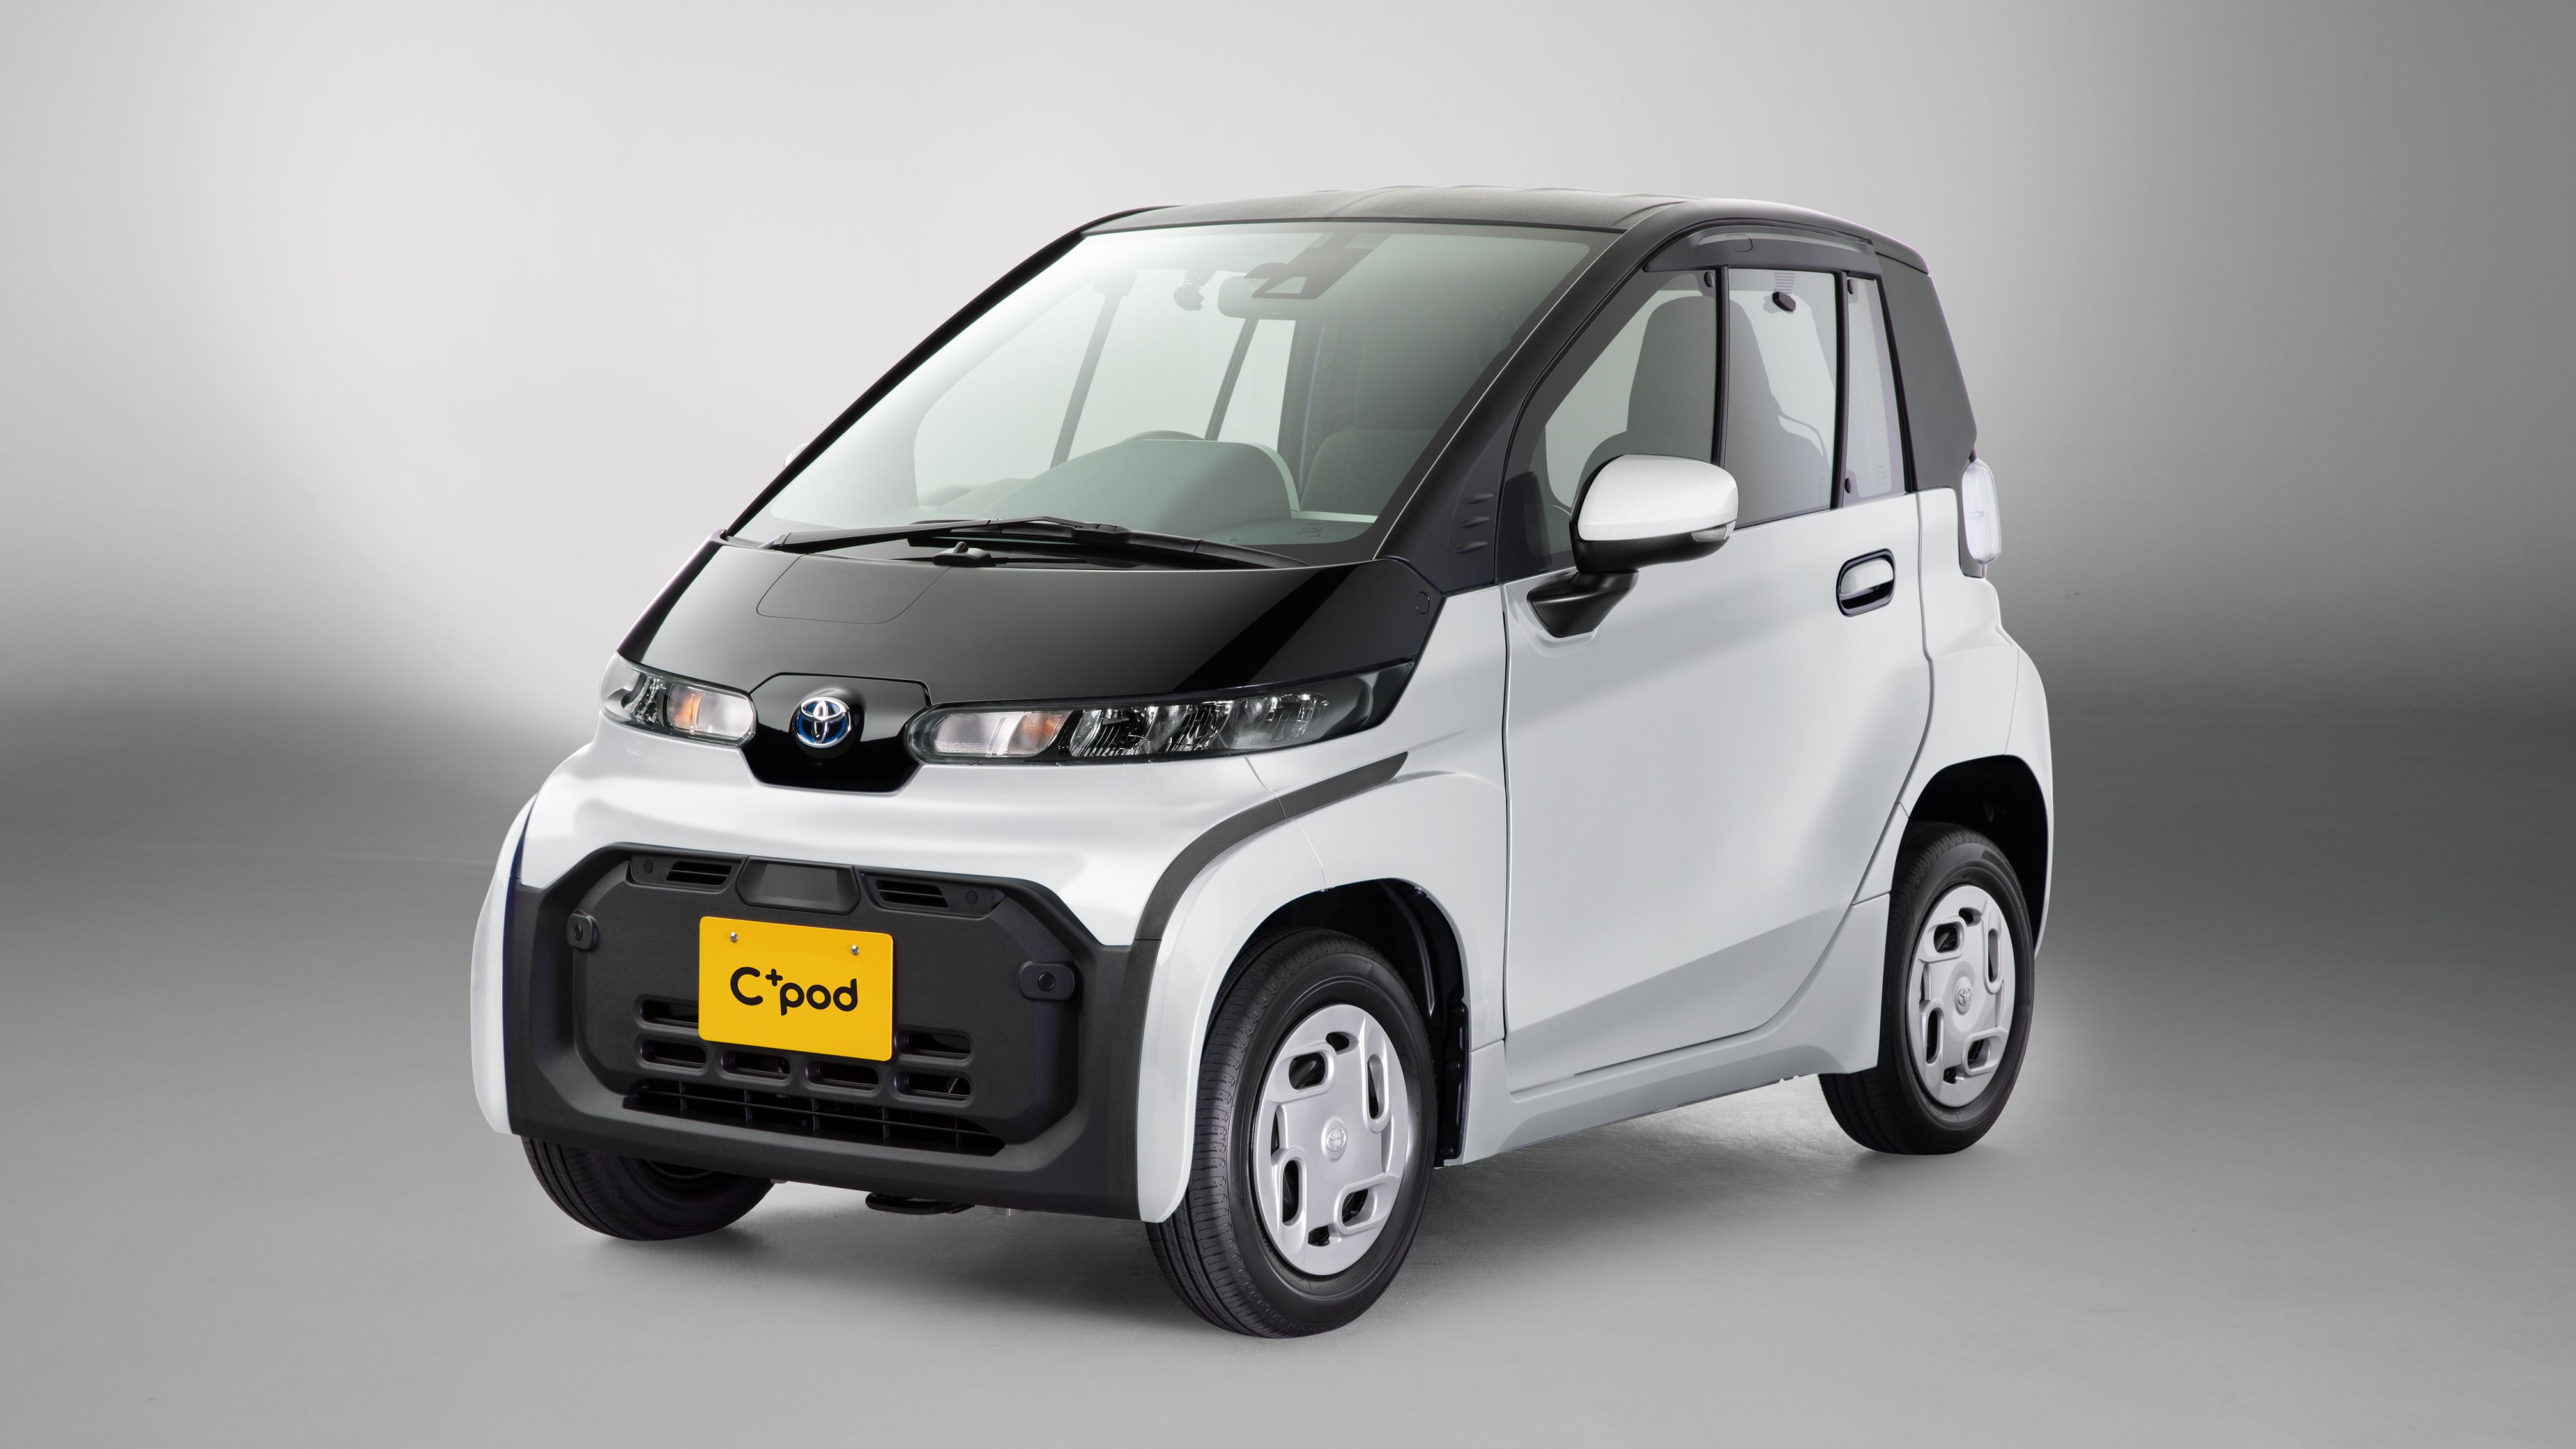 toyota's ultra-compact concept city car doubles up as a mobile office